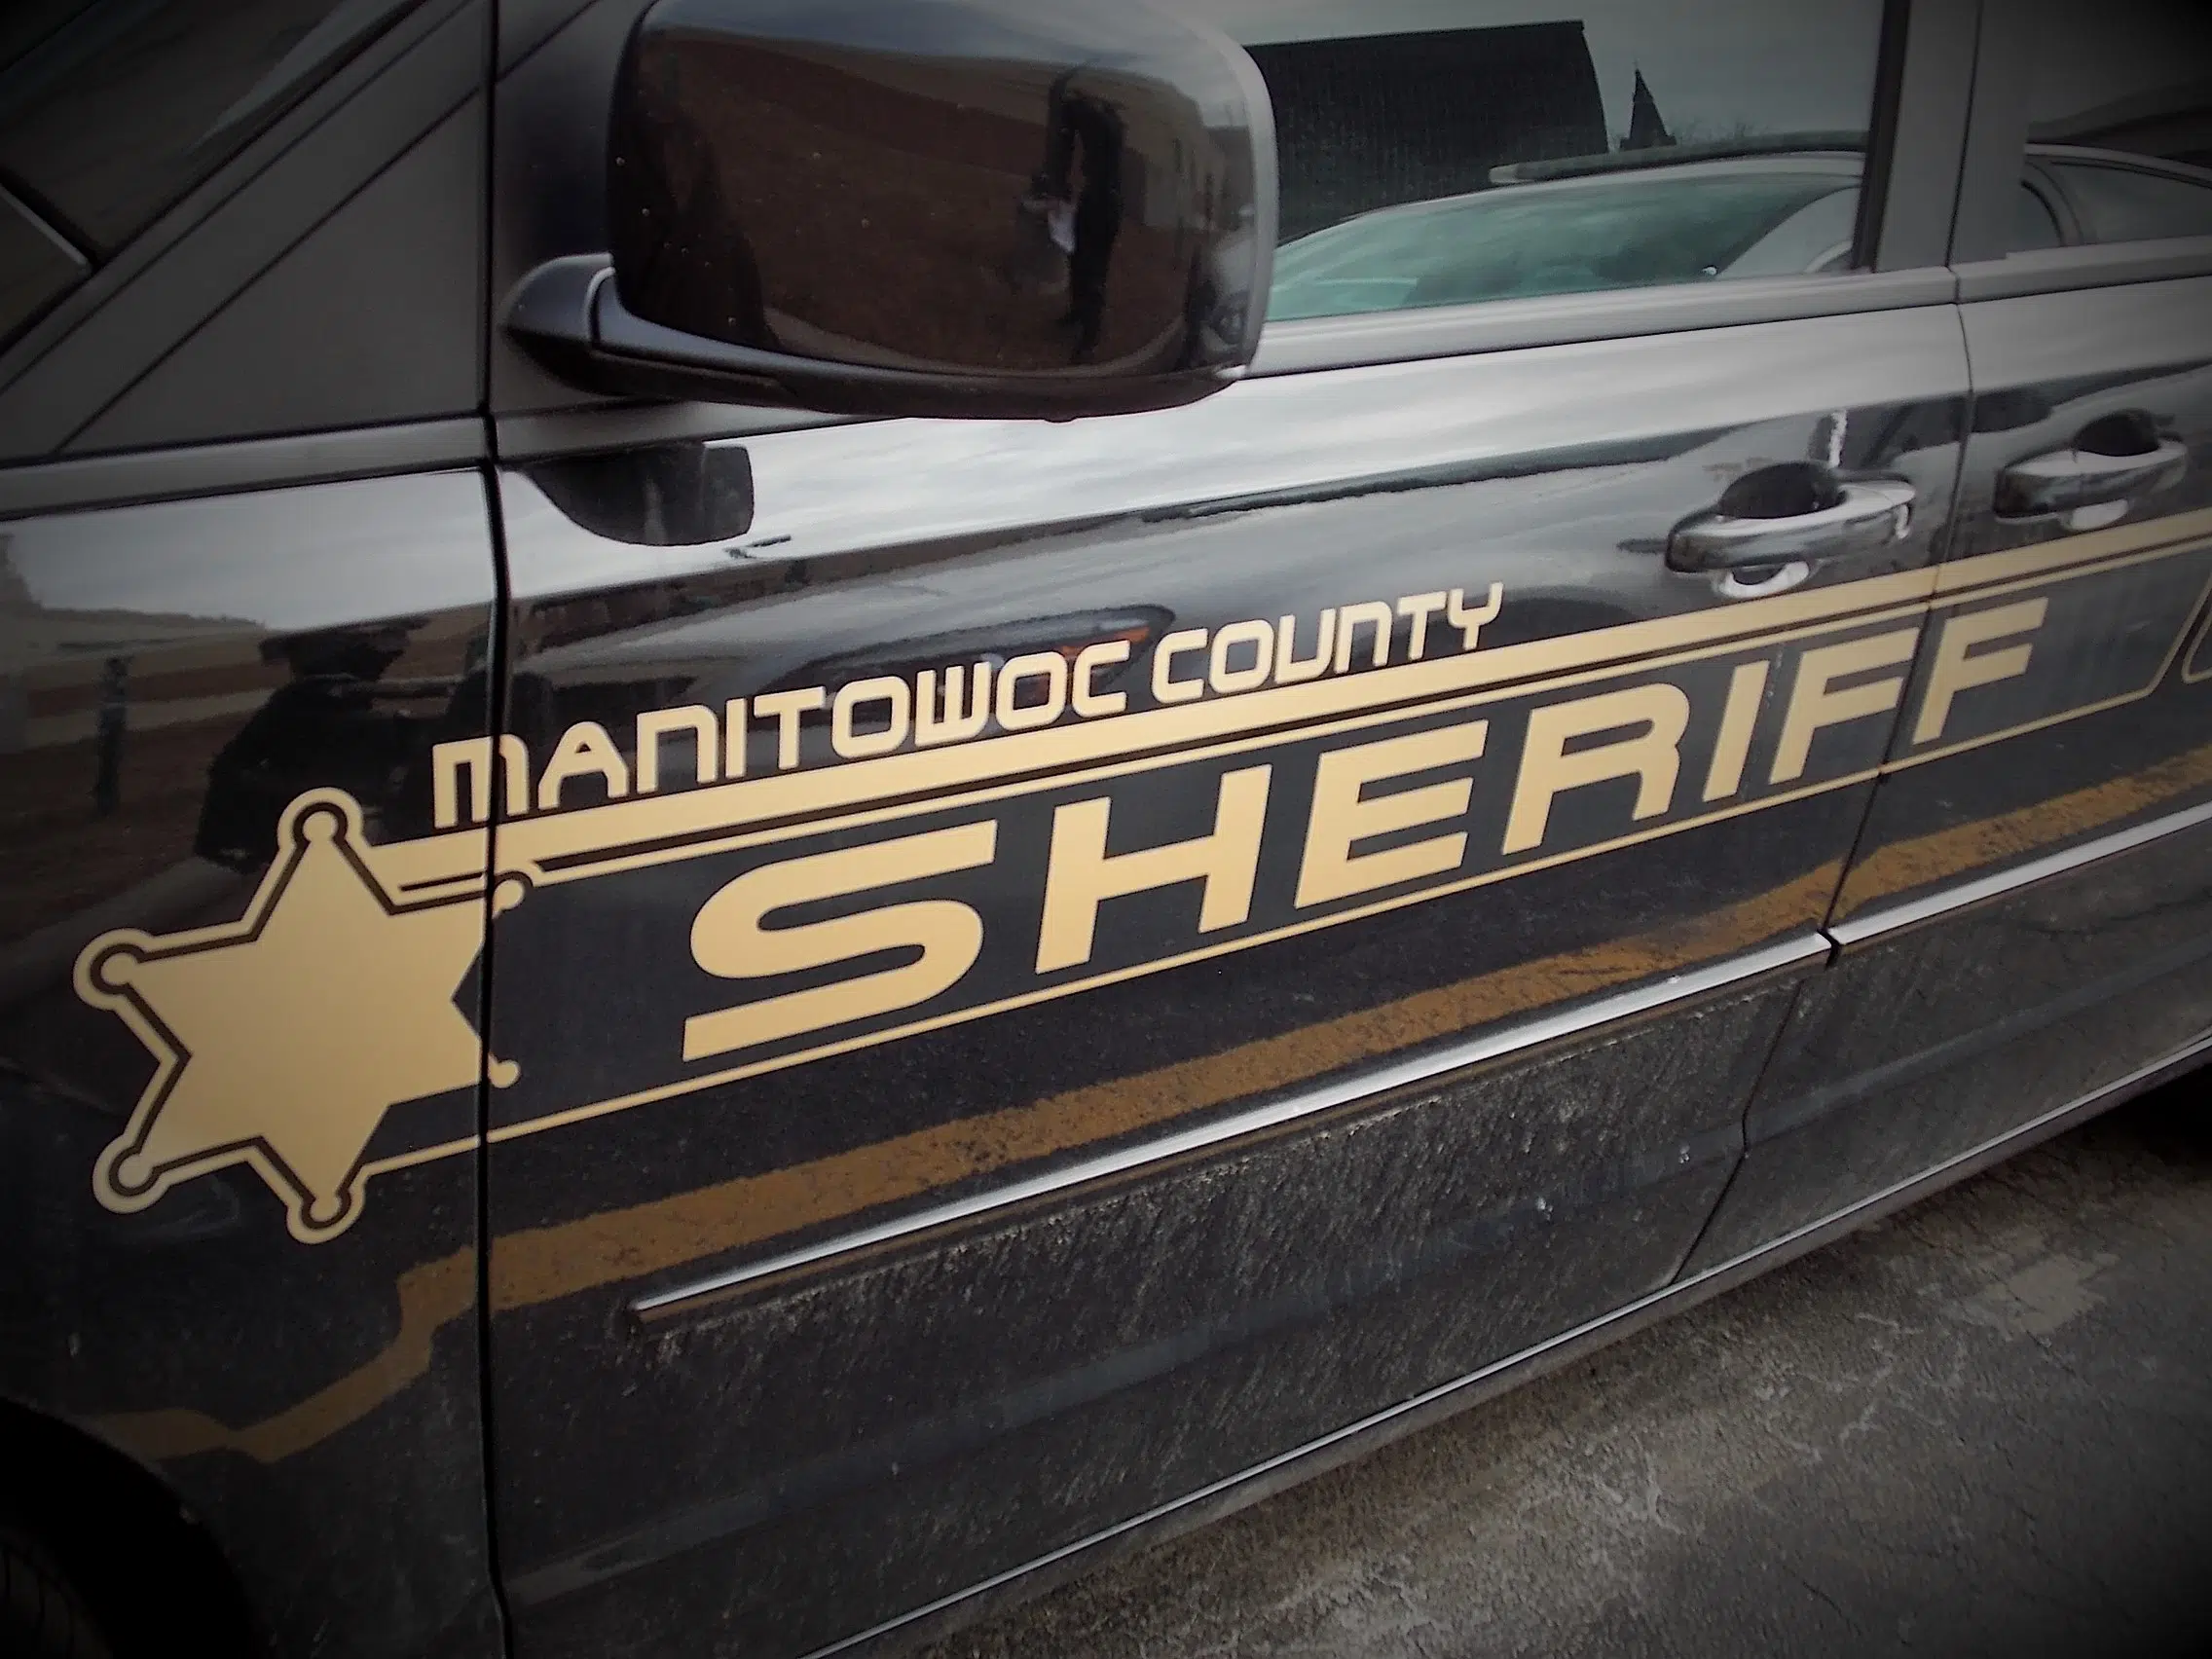 Vehicle Entries Being Reported Around Manitowoc County